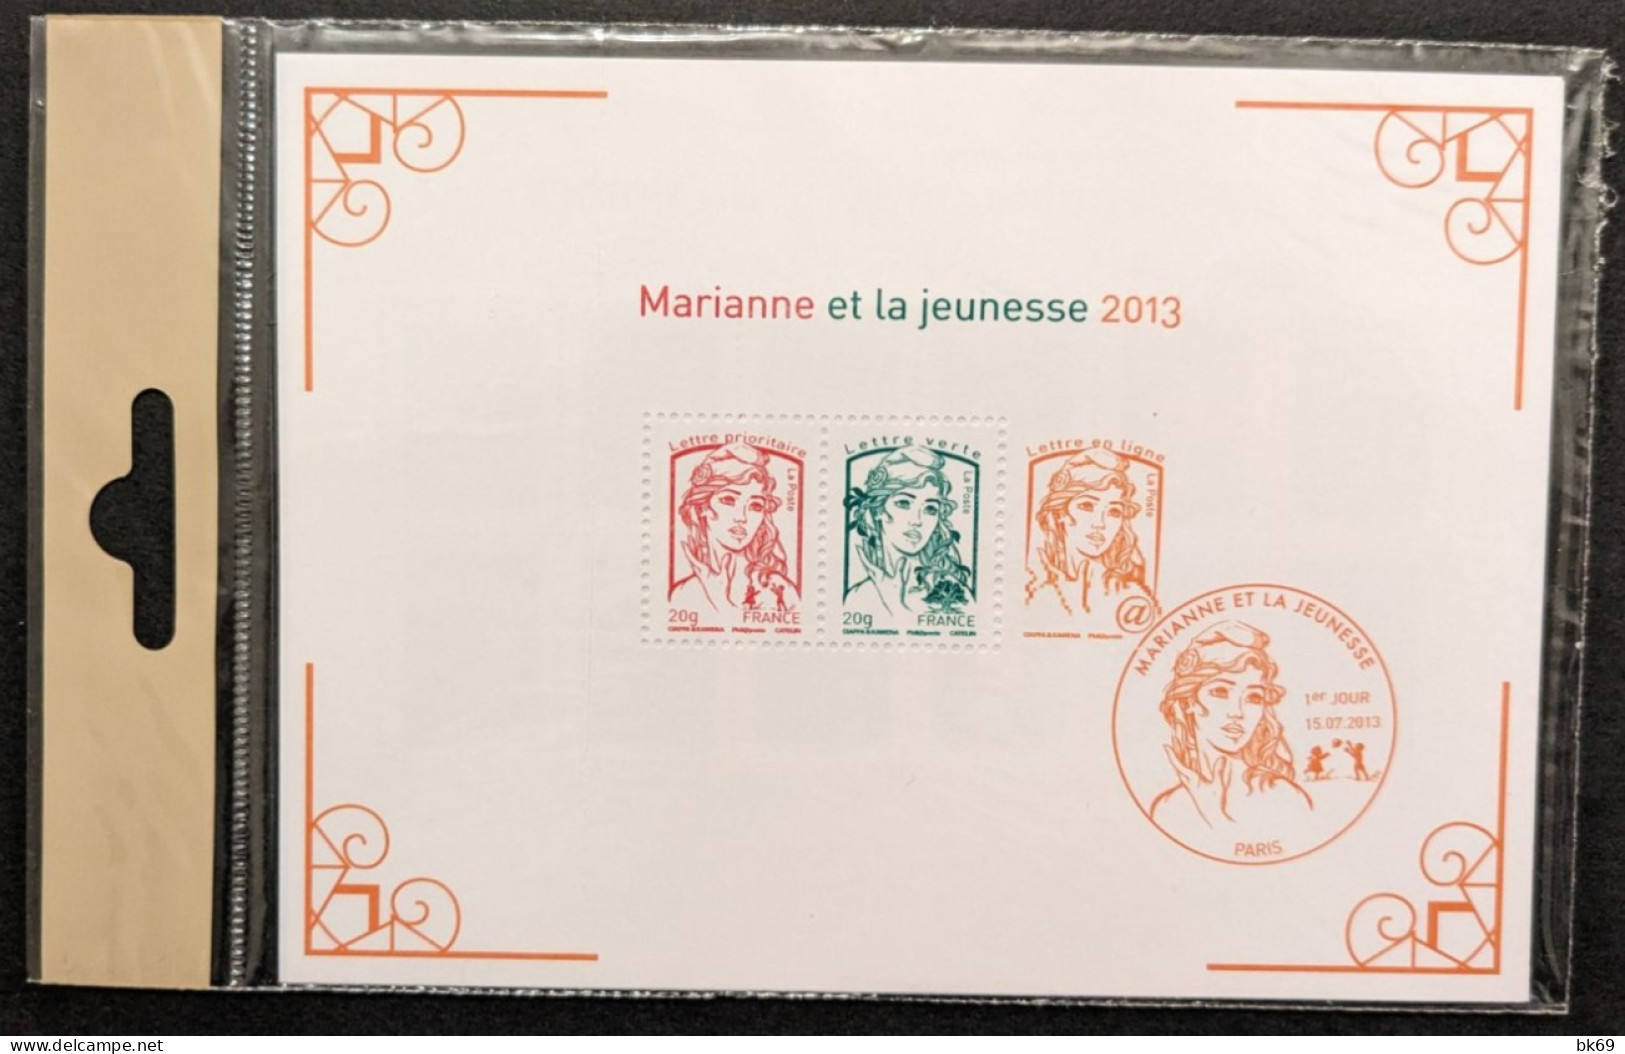 Marianne Et La Jeunesse Neuf Ss Blister F4781** & BF 153** PV 8.77€ - Mint/Hinged